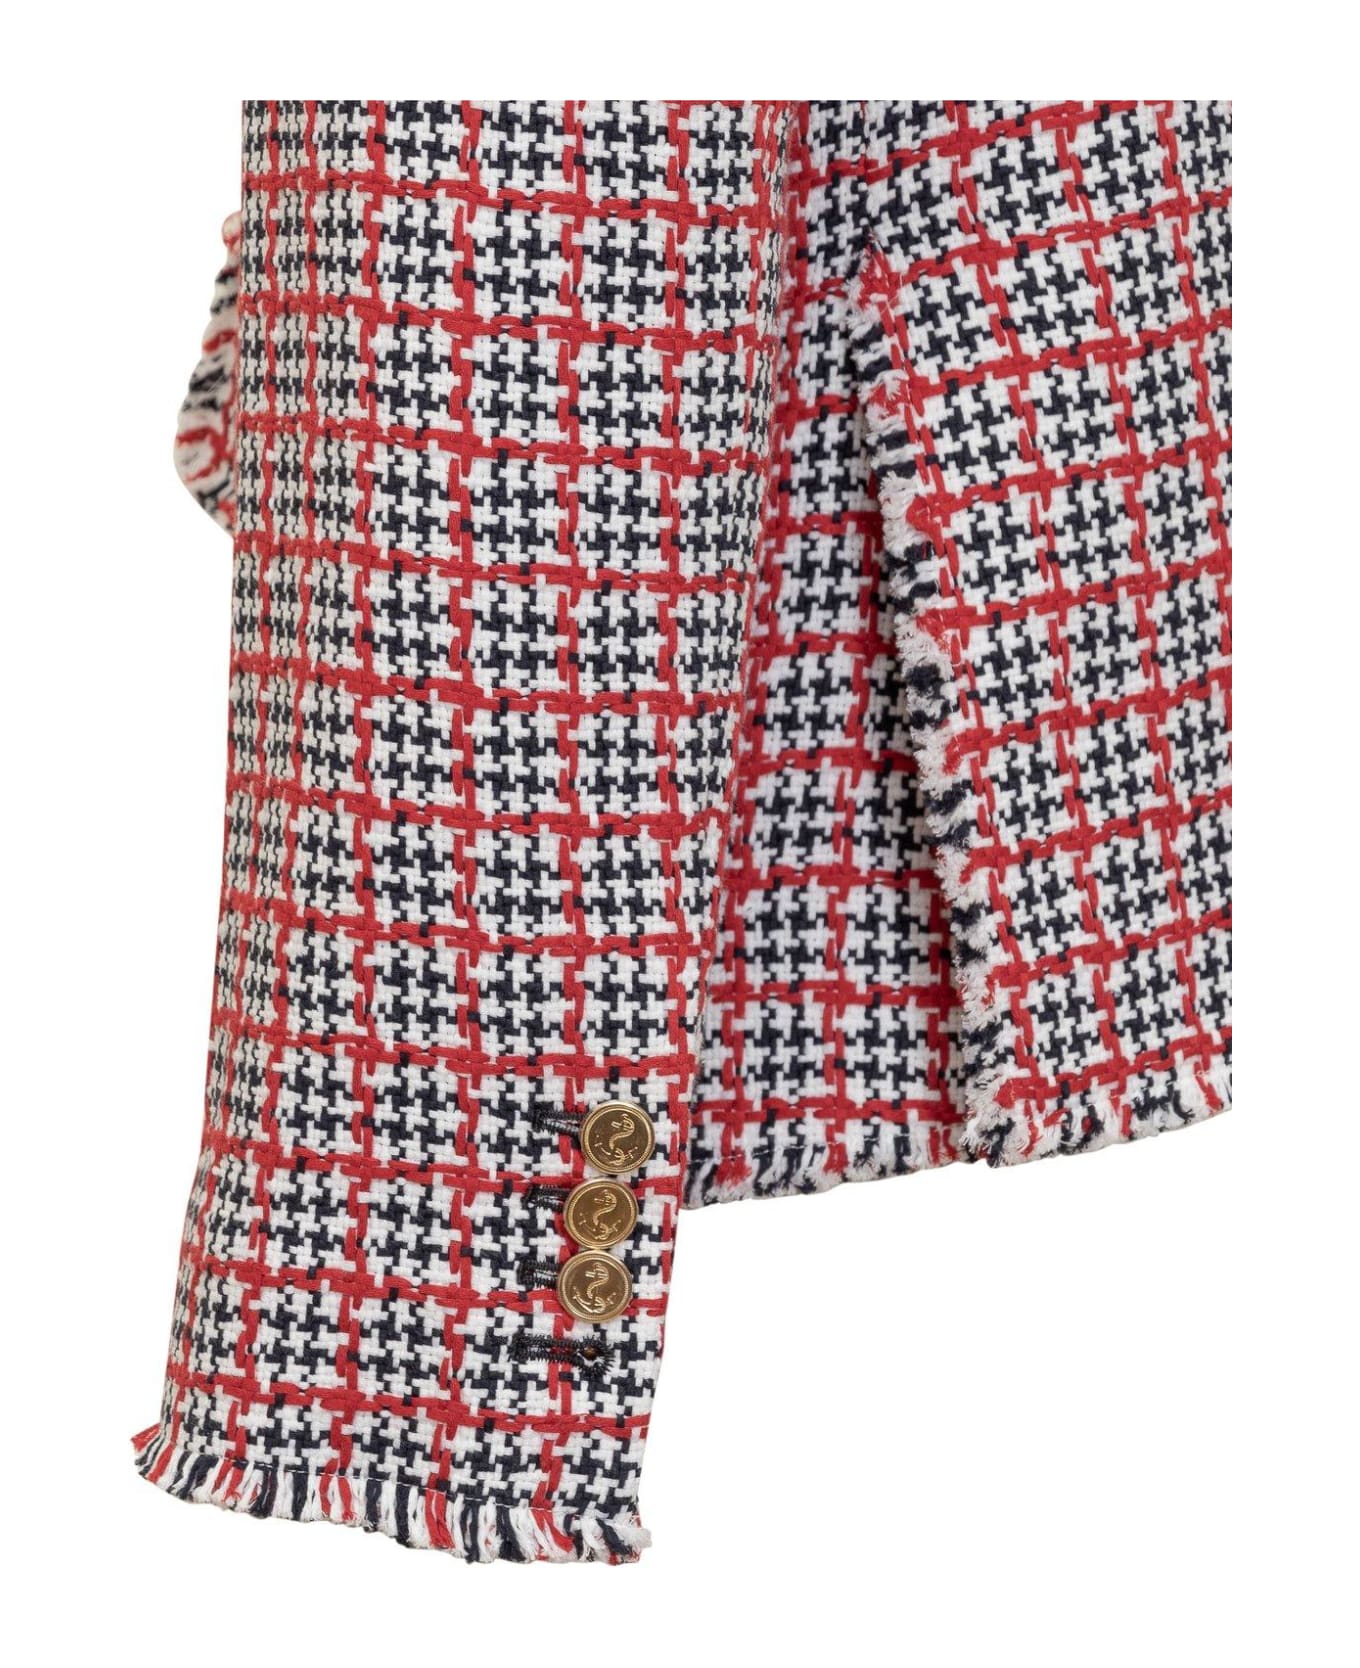 Thom Browne Checked Single-breasted Tweed Jacket - MultiColour